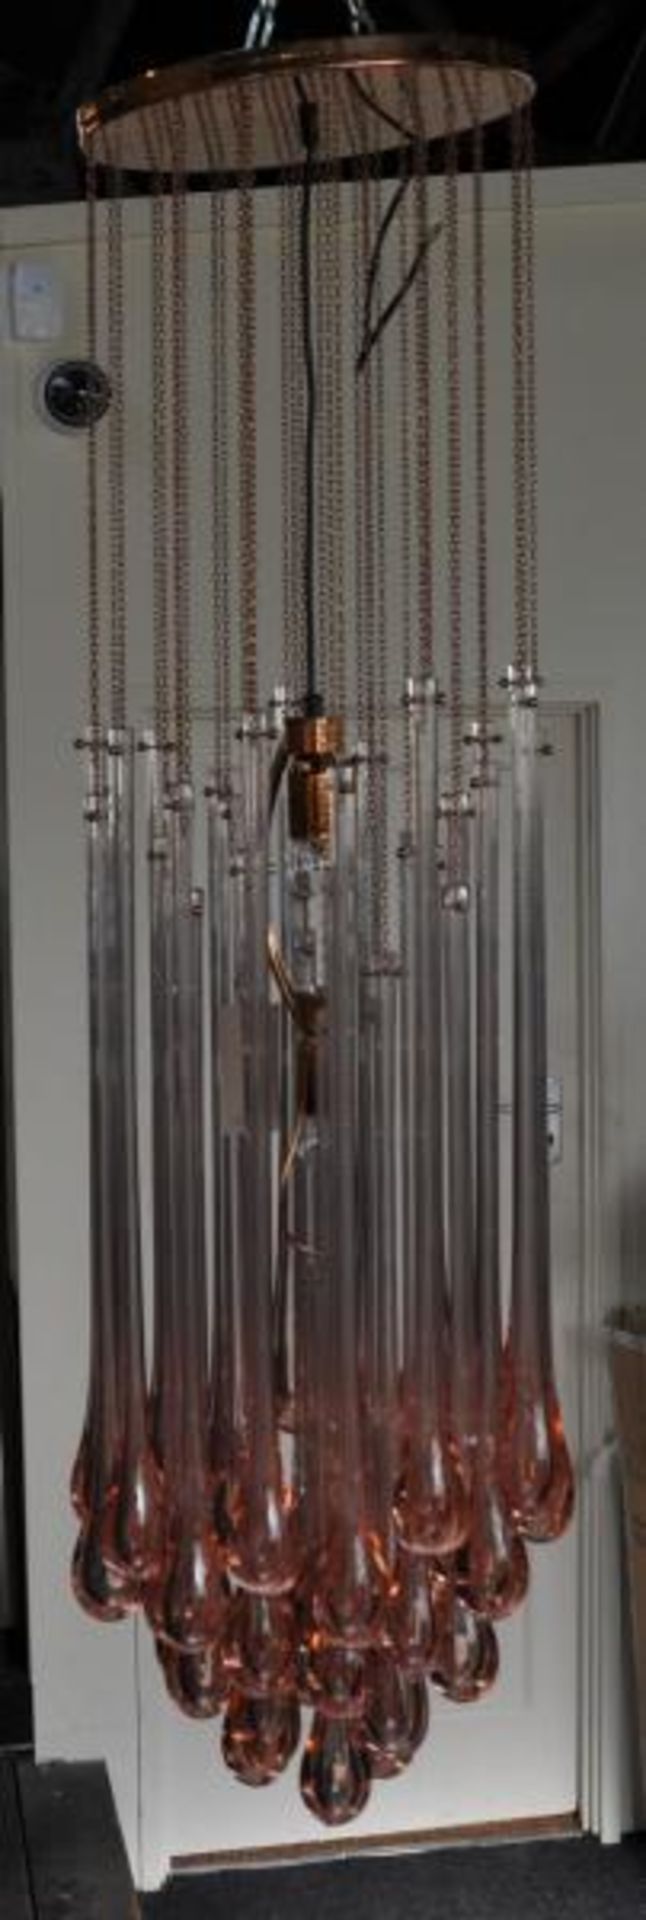 A Murano contemporary chandelier by Mazzega with approximately 40 pendant tear shaped drops - Image 5 of 7